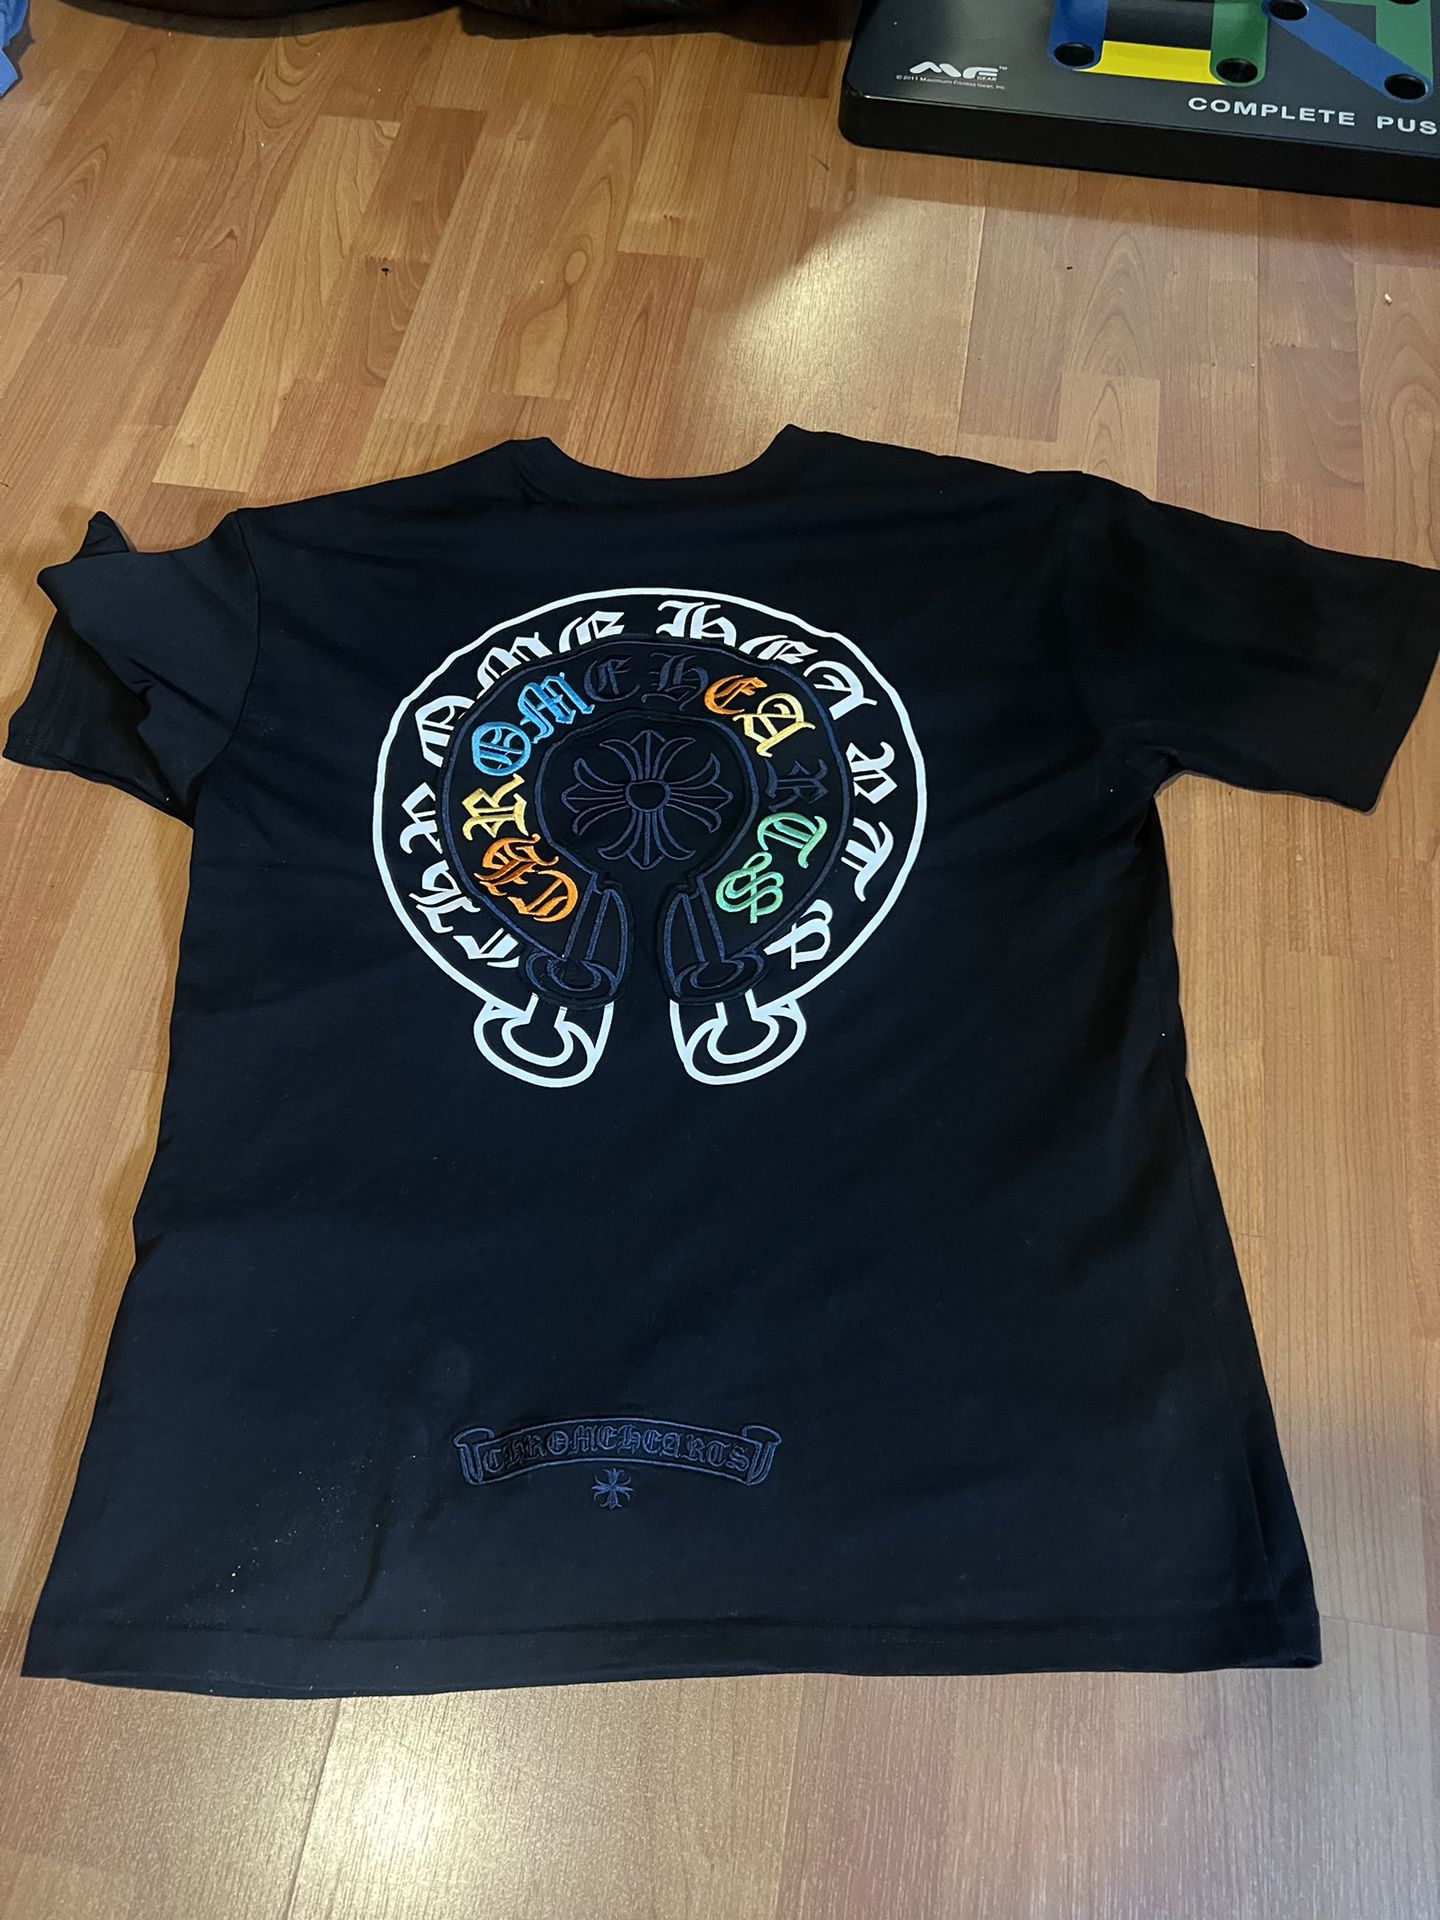 Hollywood Chrome Hearts T-Shirt for Sale in Las Vegas, NV - OfferUp